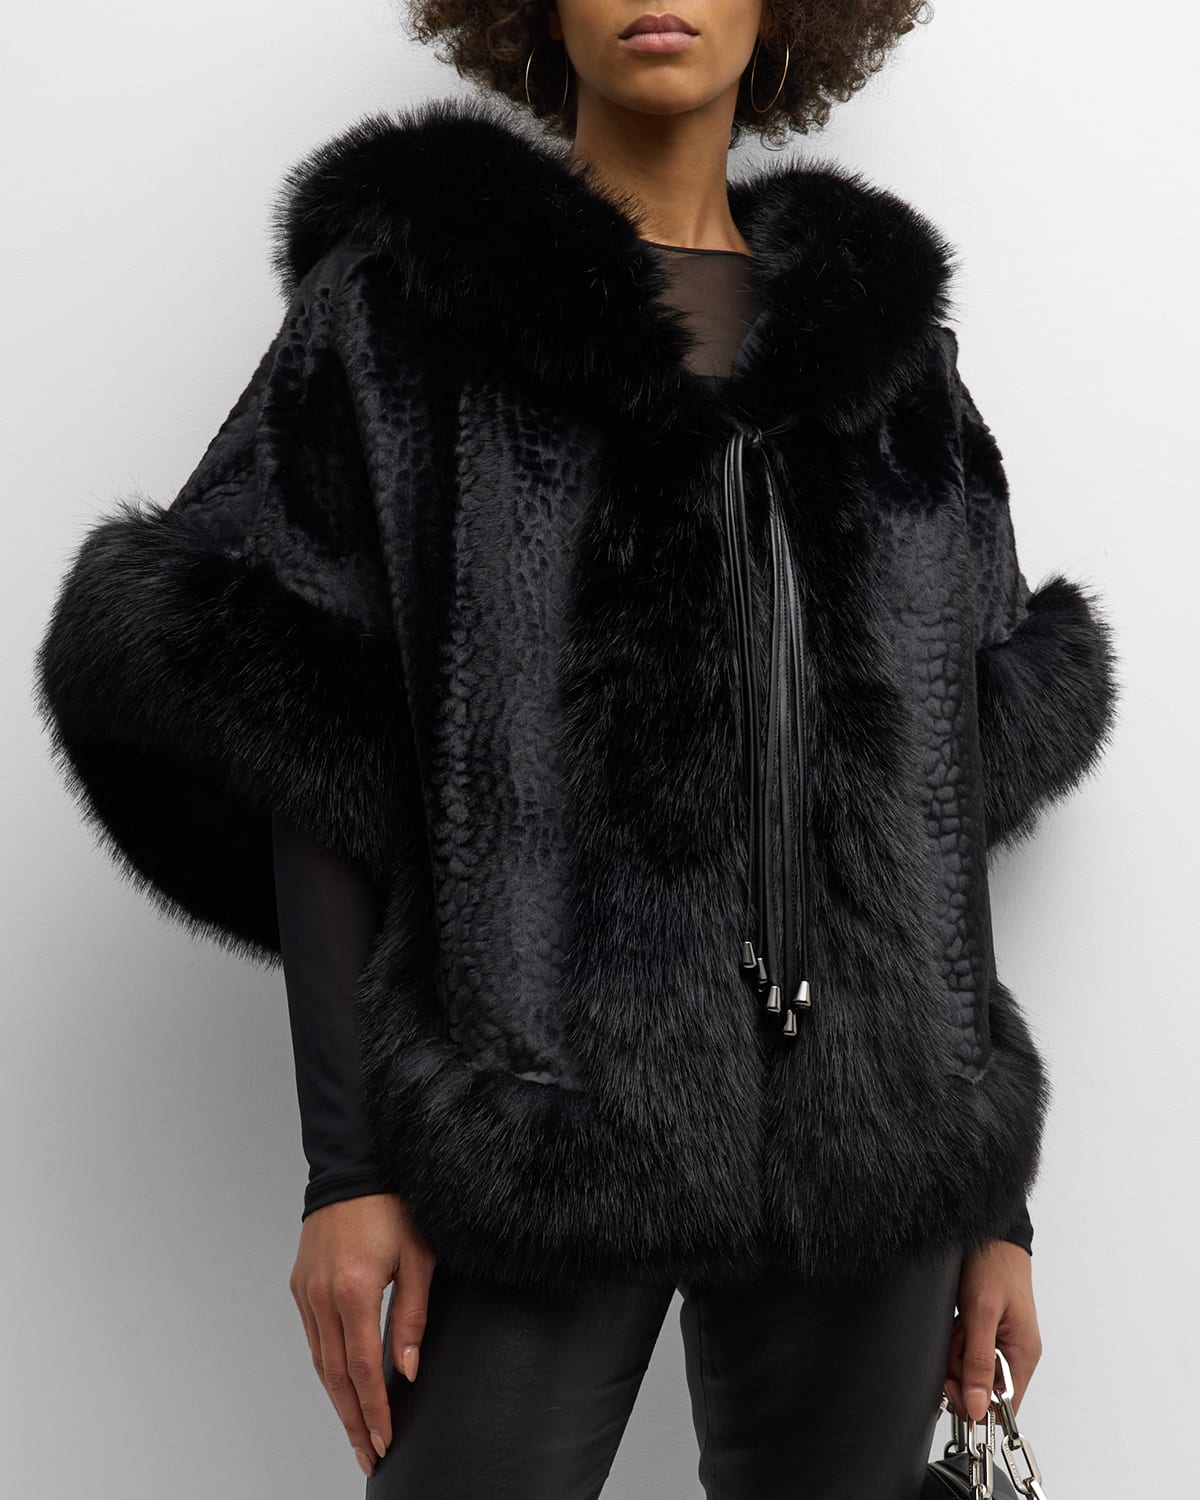 Hooded Faux Fur Poncho with Leather Strings